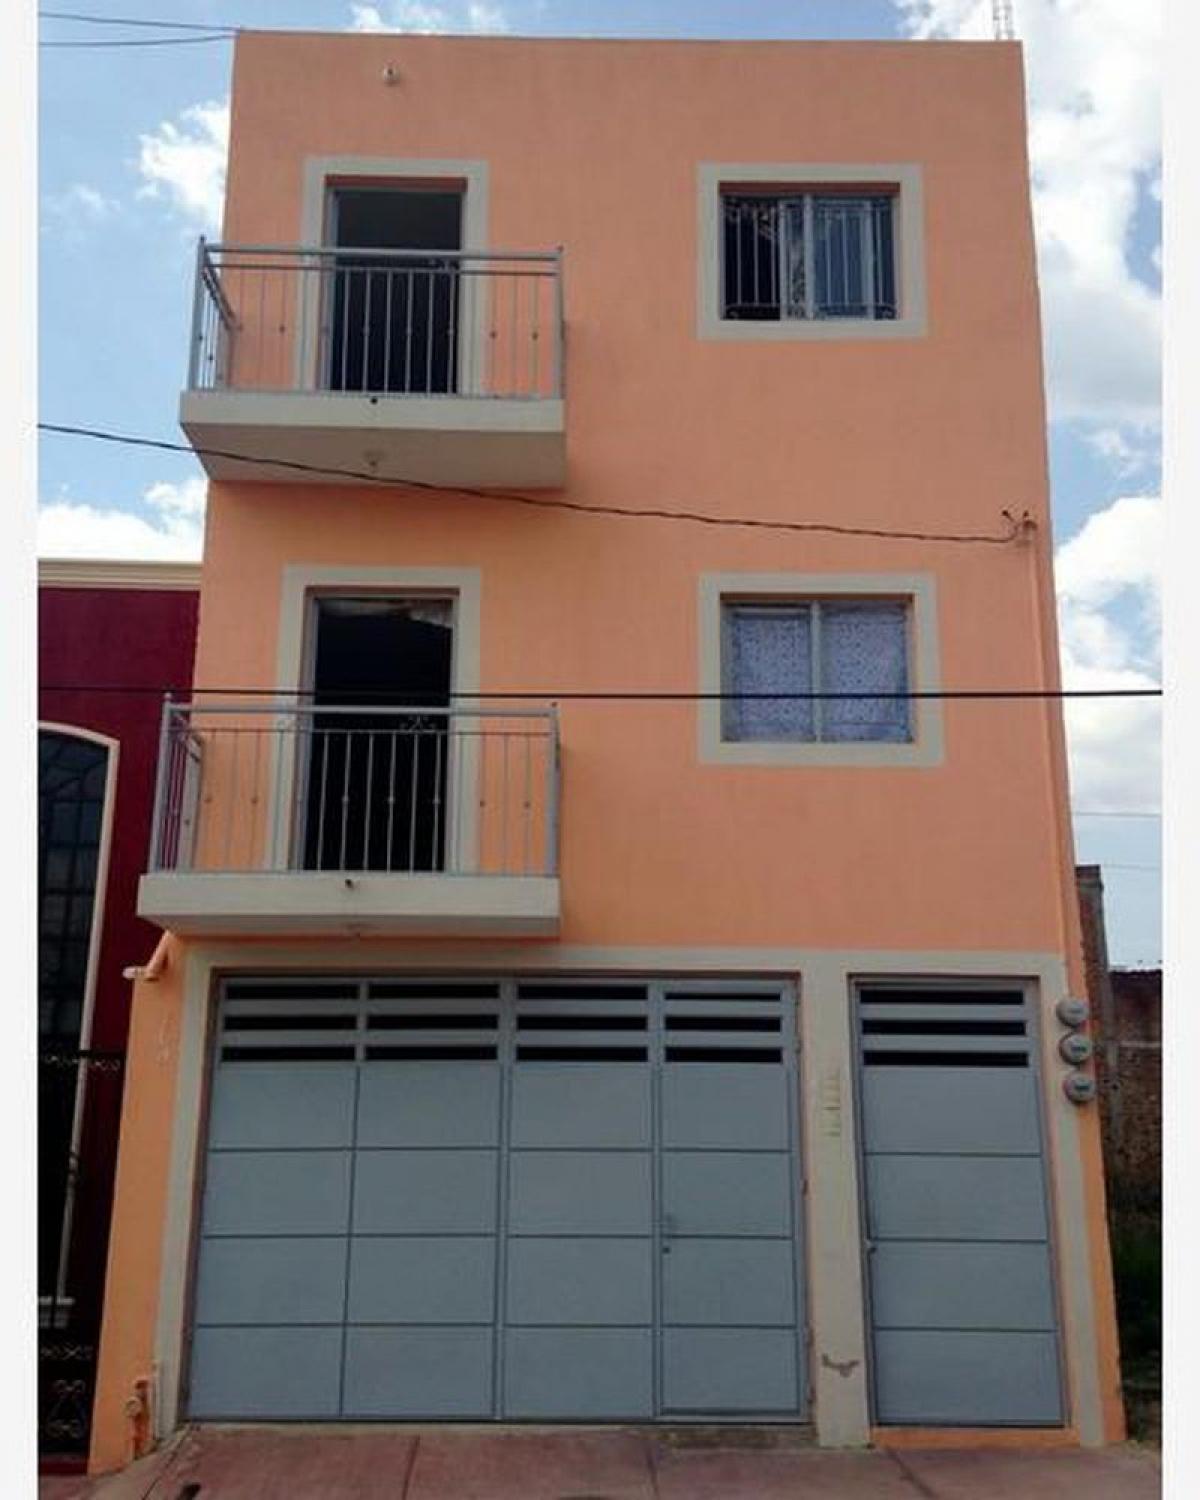 Picture of Apartment Building For Sale in Zapotlanejo, Jalisco, Mexico